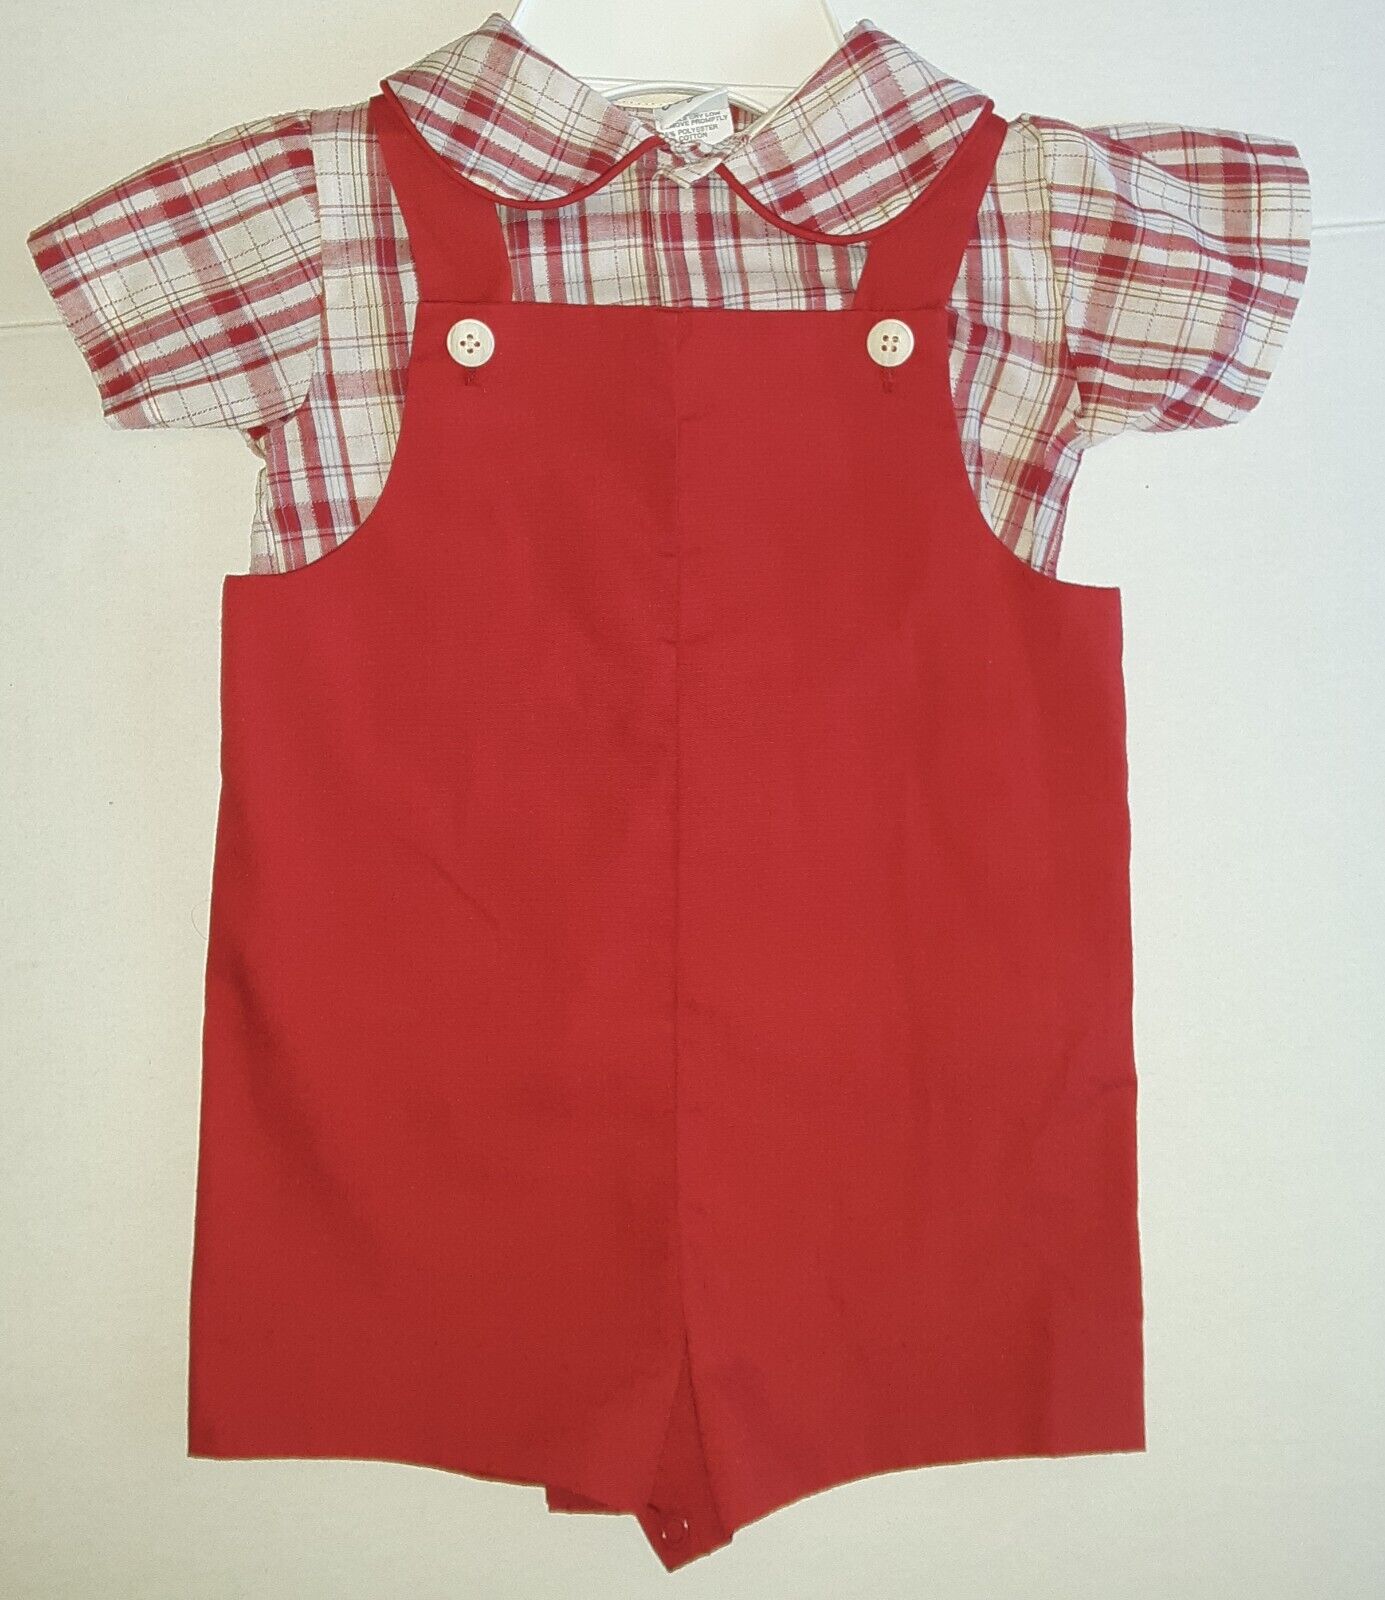 Baby Boy Vintage Bryan Outfit Overall Shorts & Plaid Shirt Set Size 24 Month